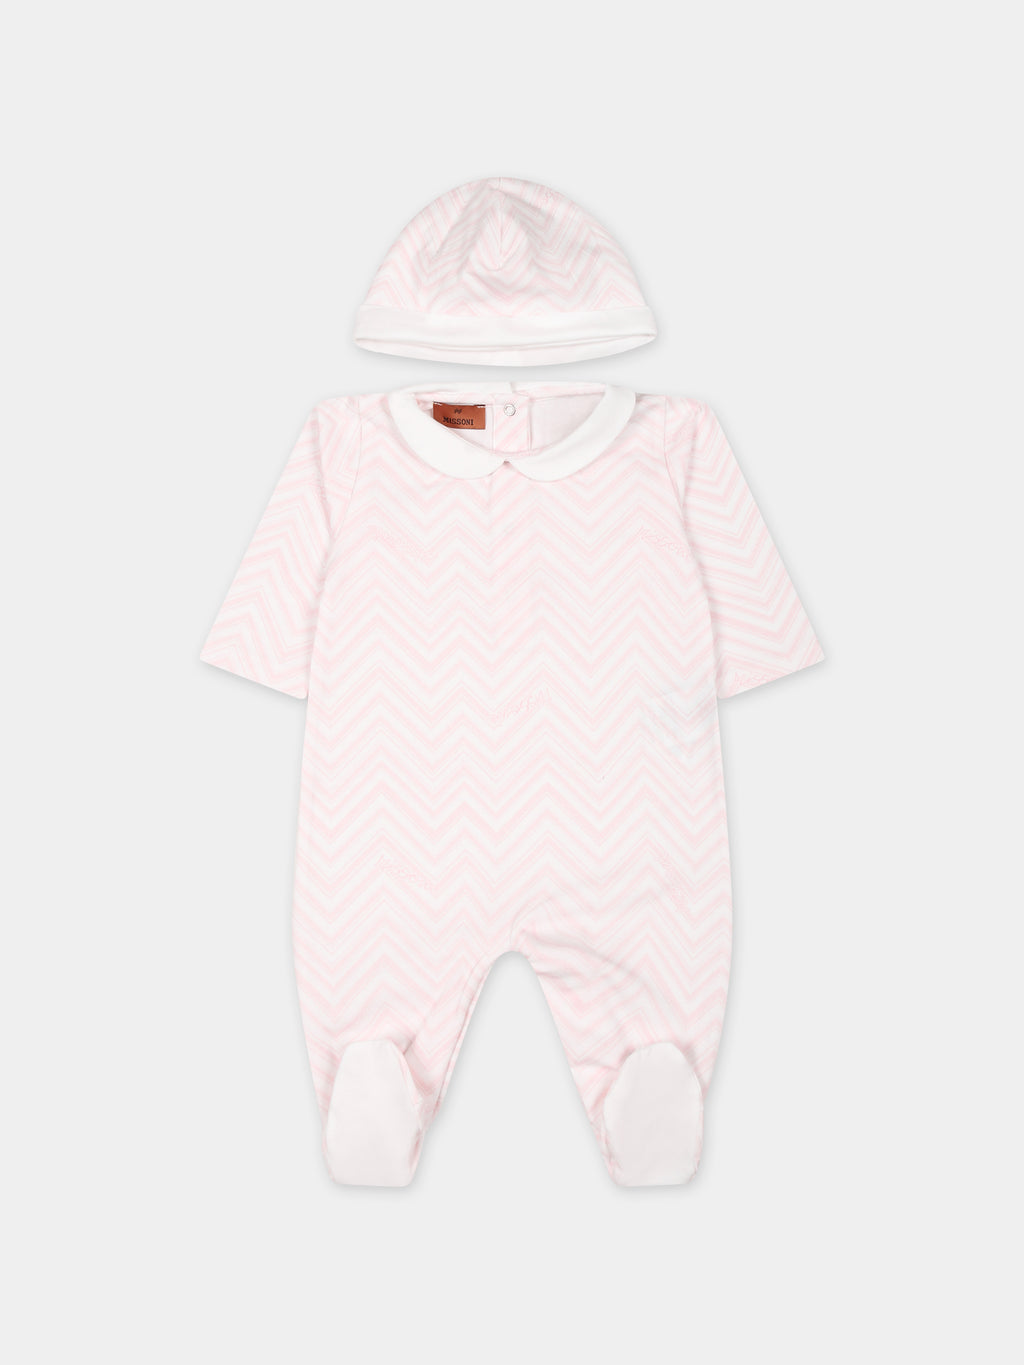 White suit for baby girl with chevron pattern